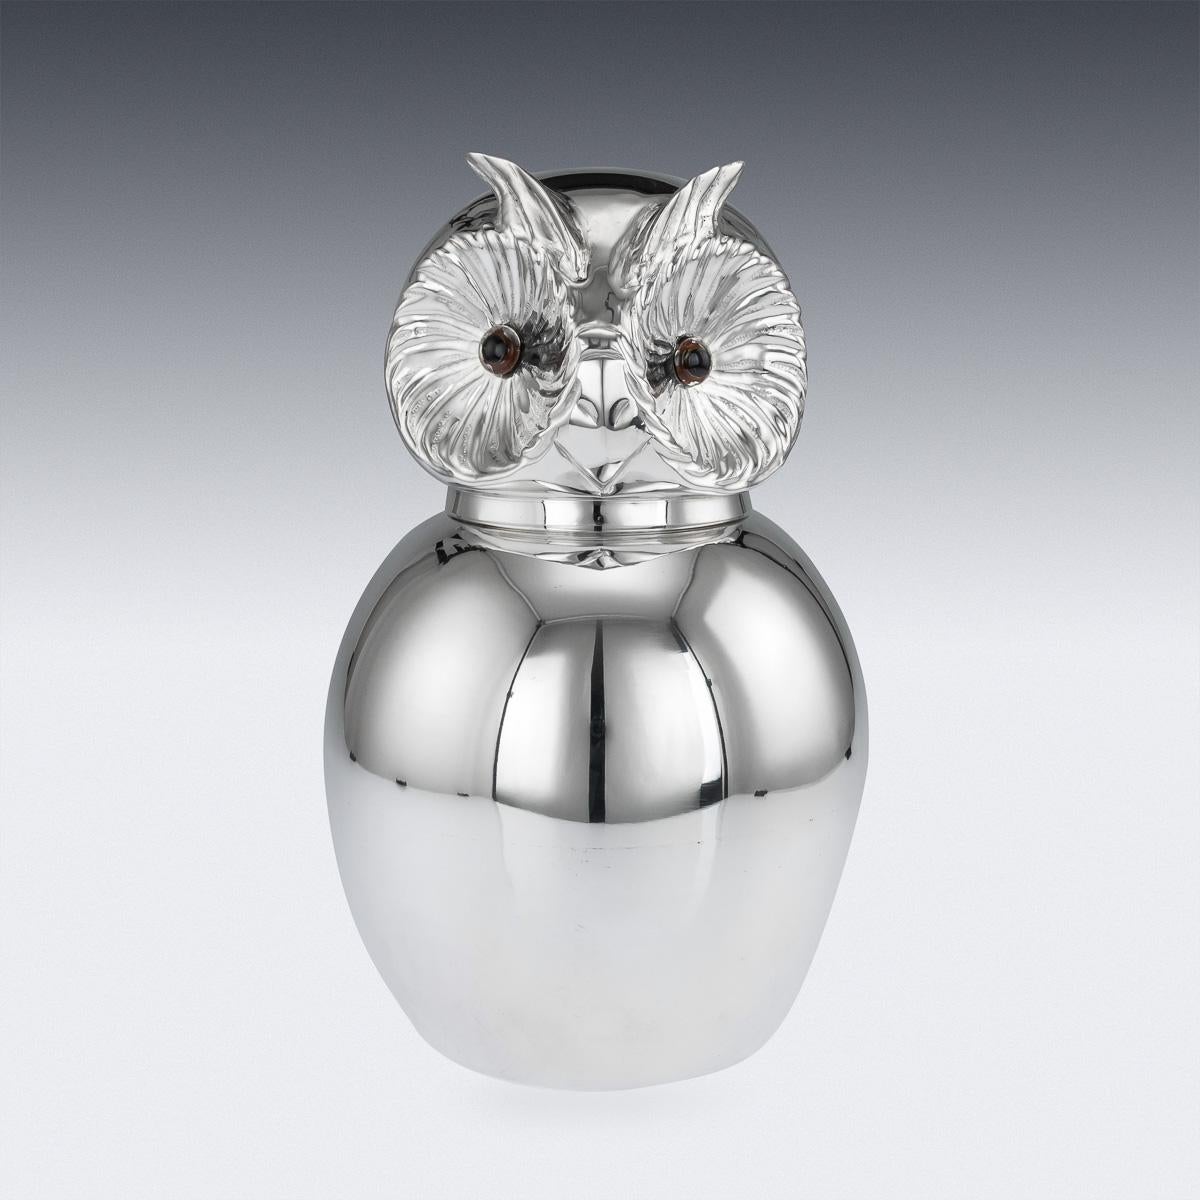 Novelty 20th Century Italian silver plated owl shaped wine cooler. Of large size and realistically modelled with a hinged head, set with glass eyes, inside fitted with a removable liner, a true conversation piece, that will add novelty and fun to